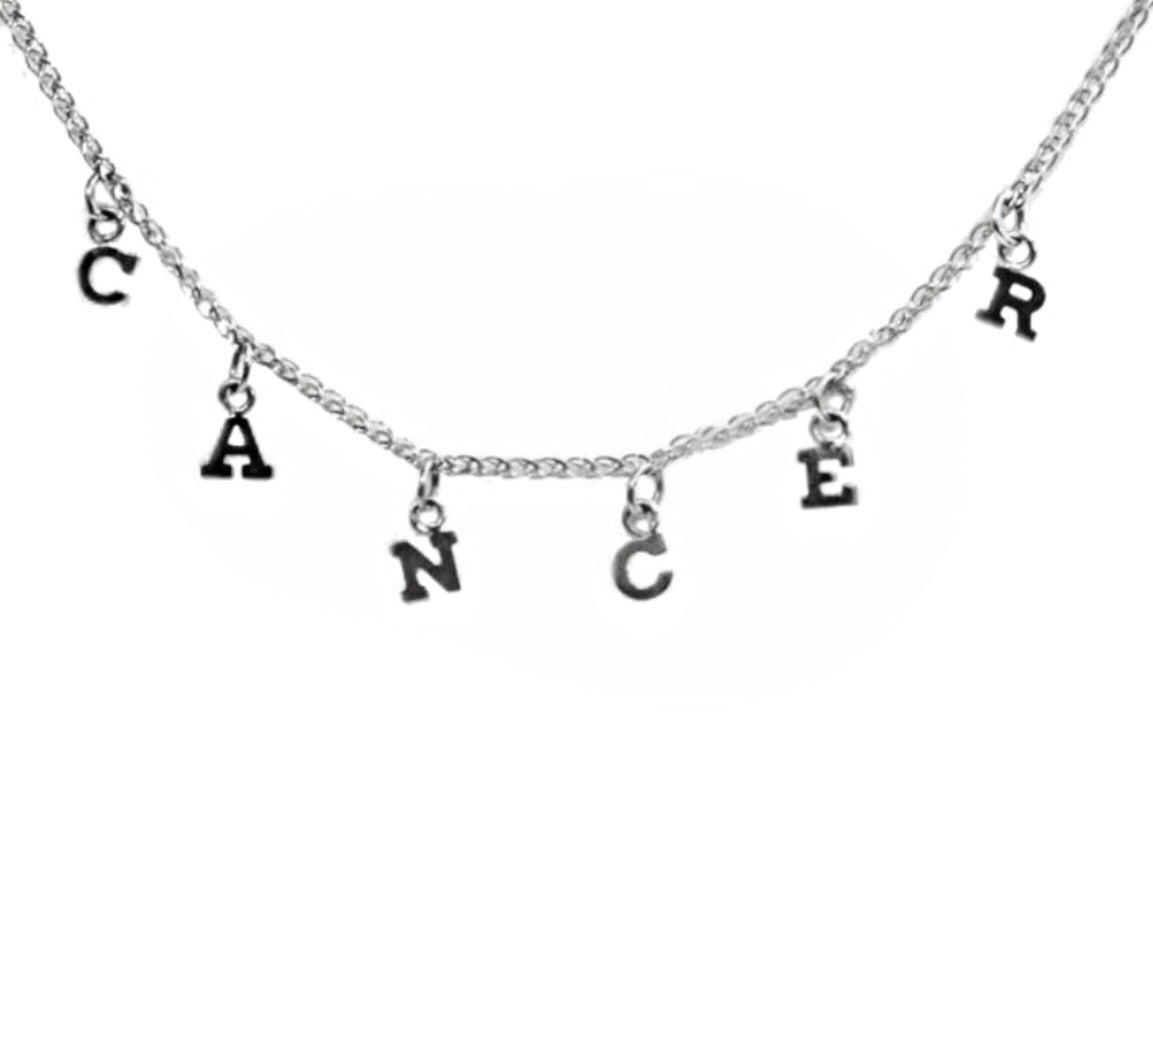 14k WHITE GOLD DANGLING LETRAS NECKLACE